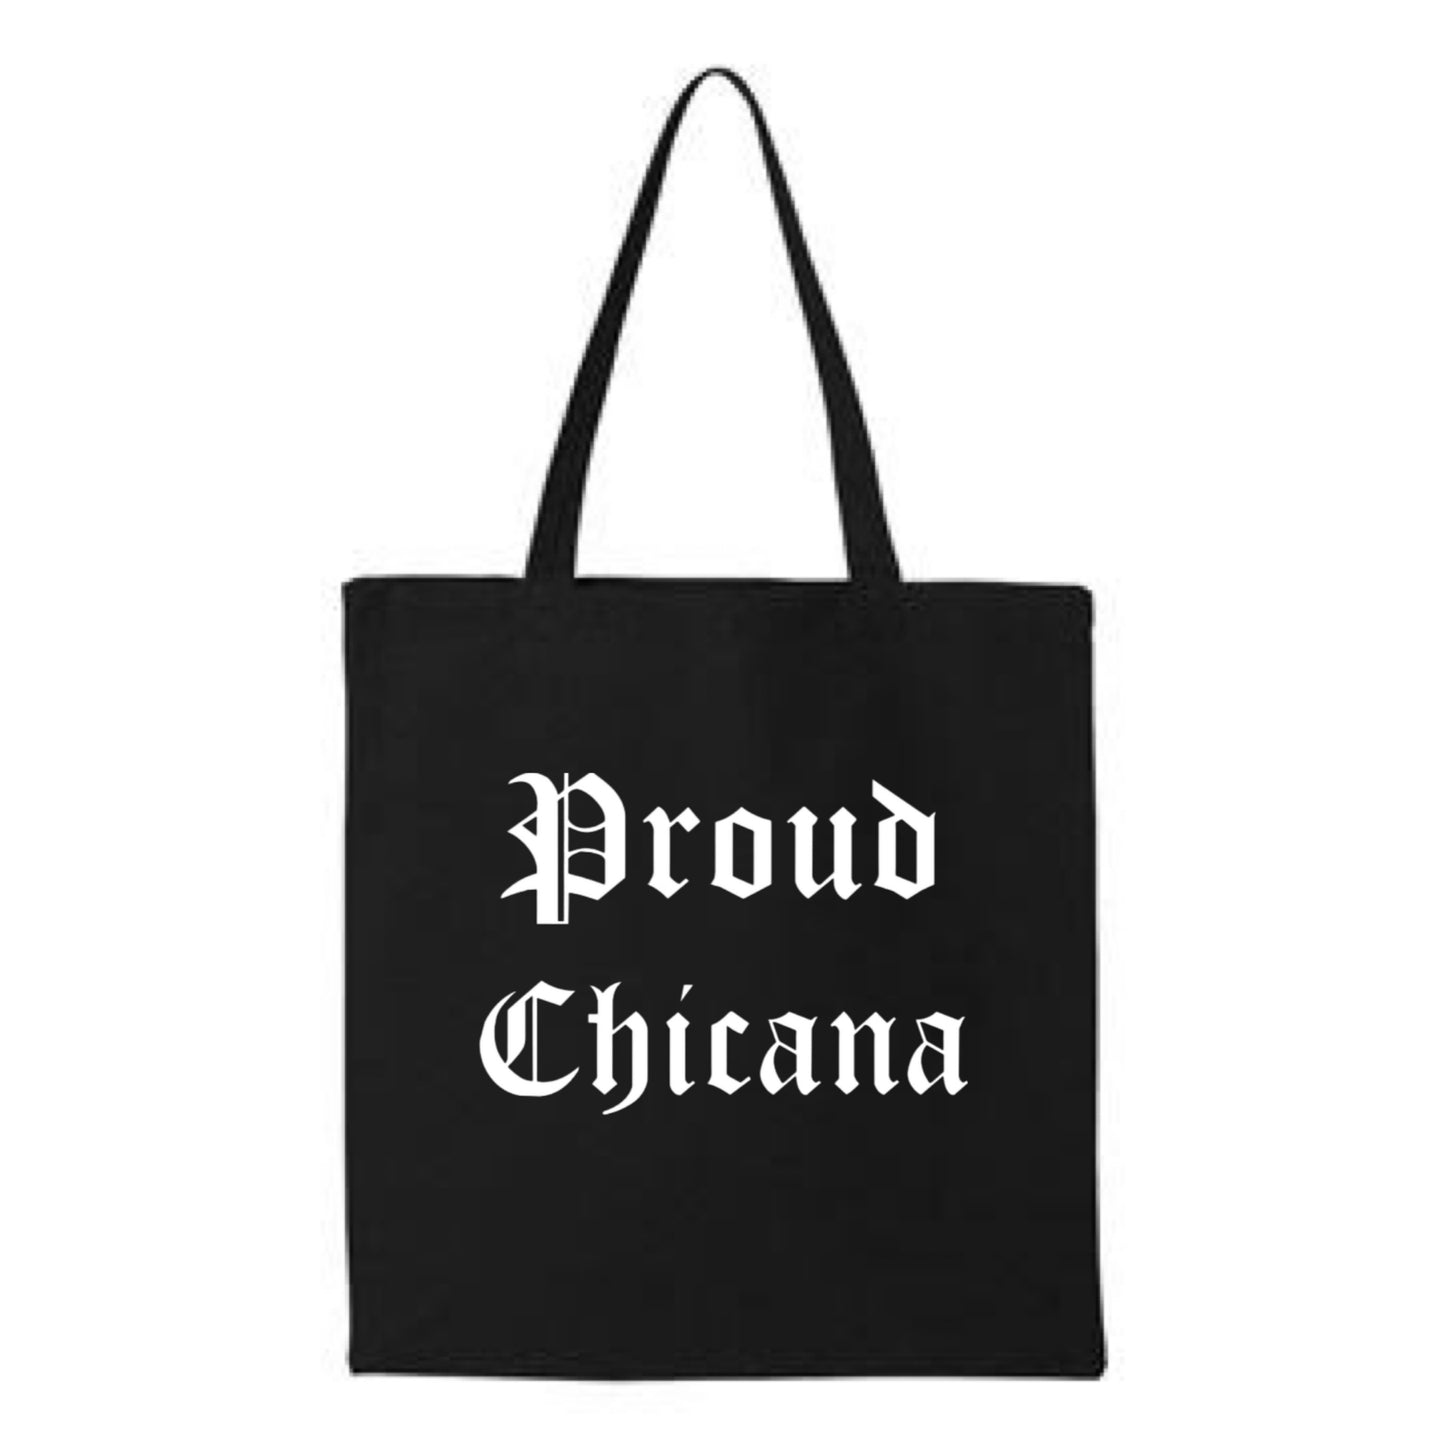 Proud Chicana Tote Bag